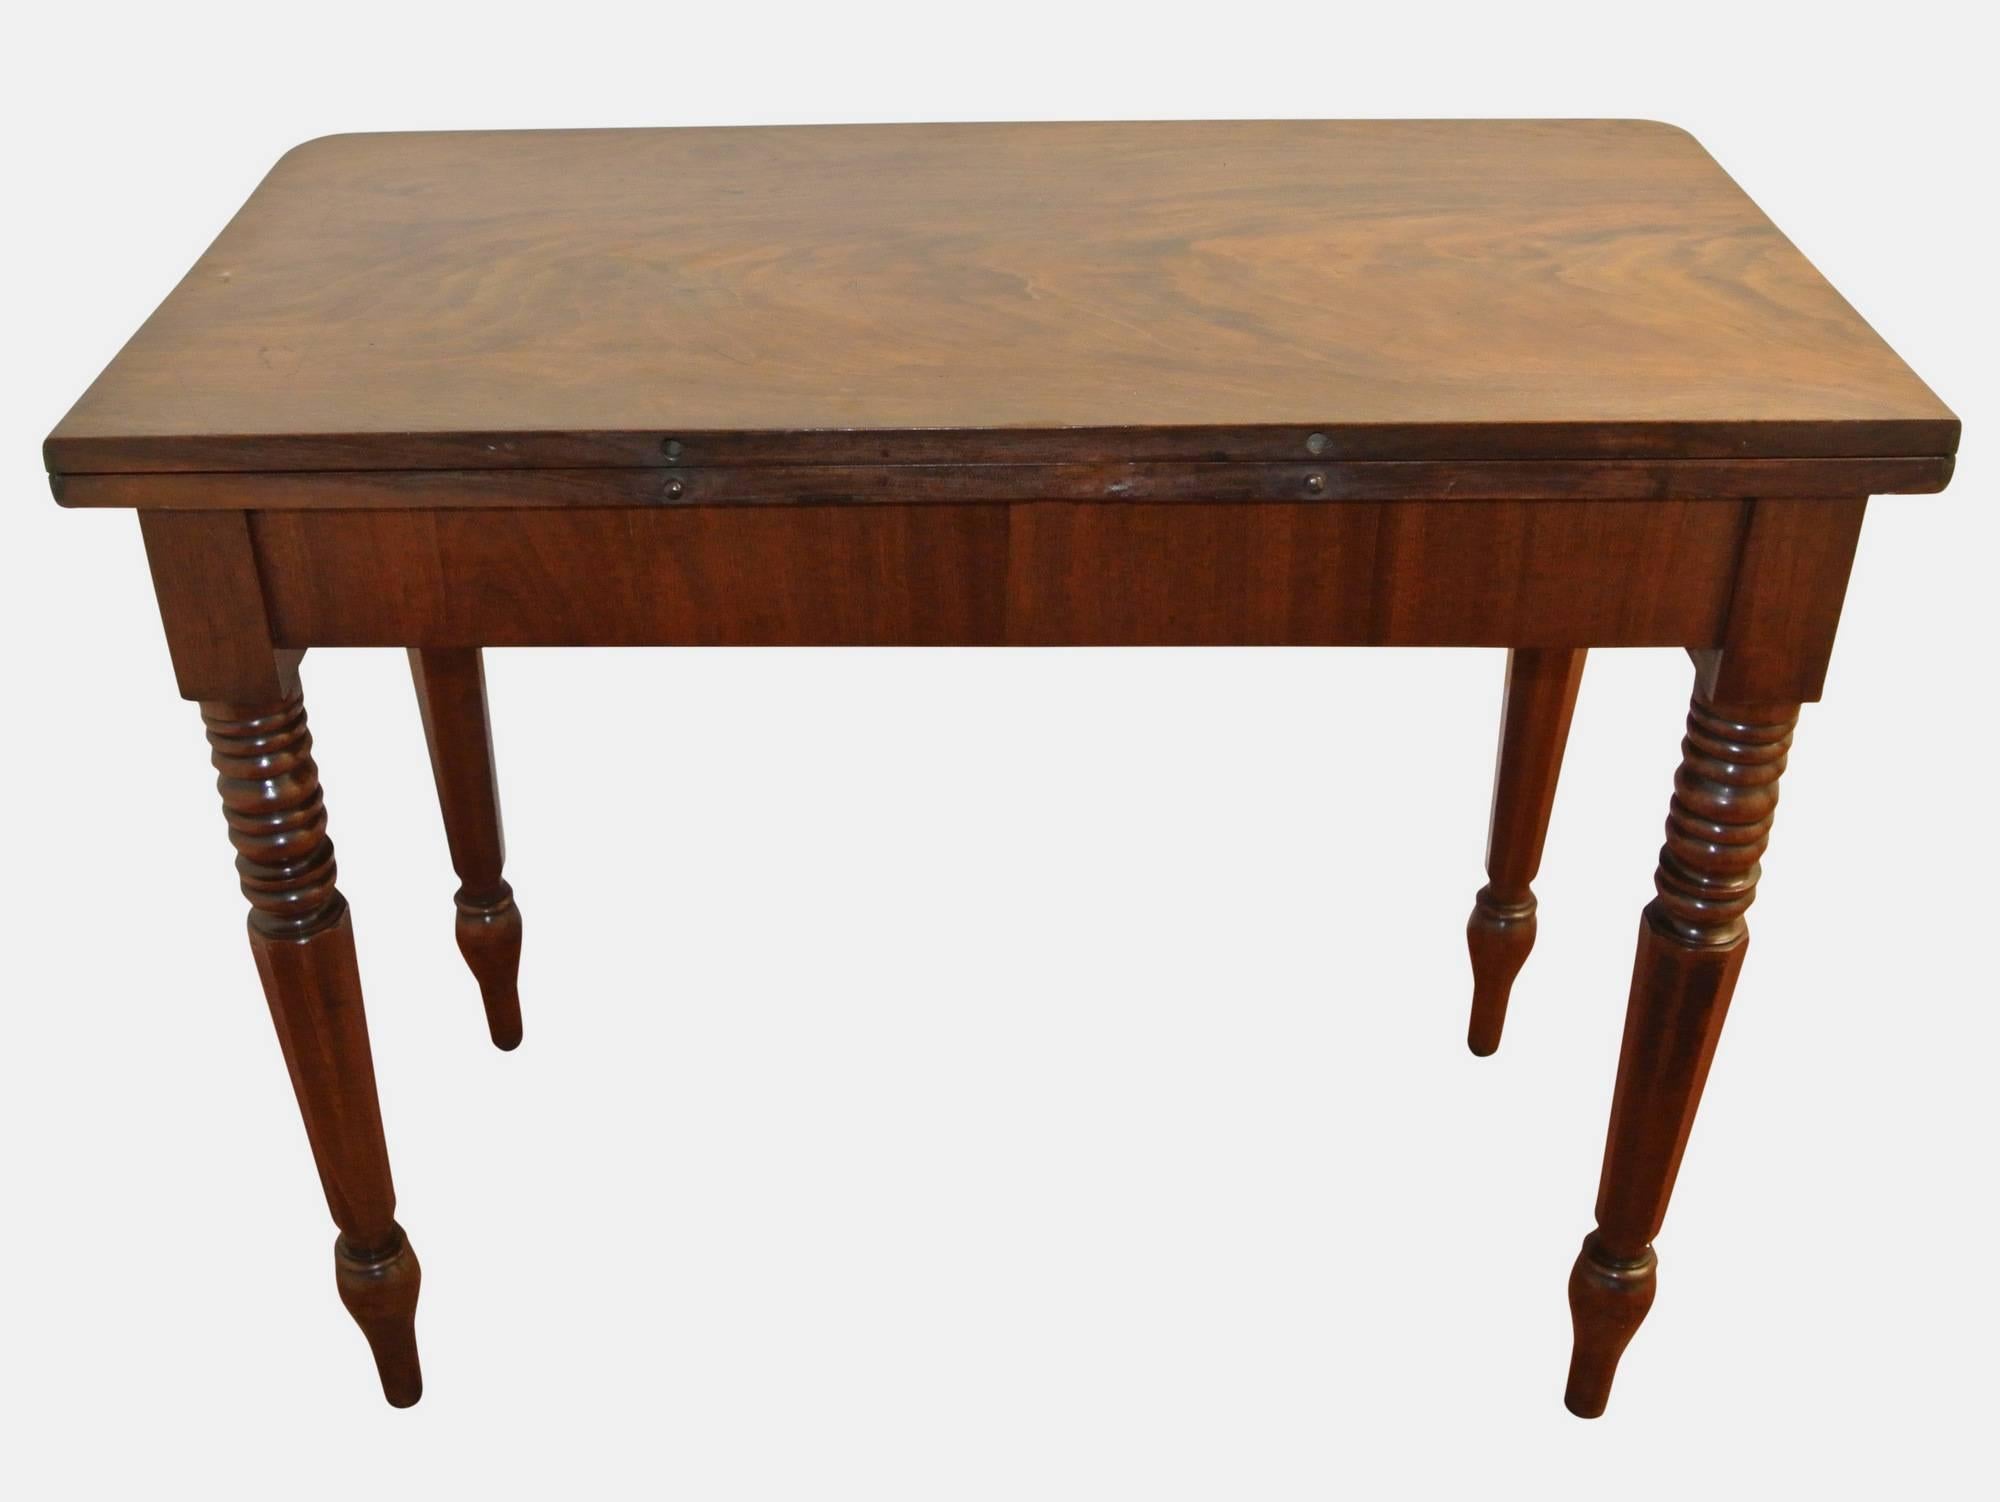 Beautifully figured flame mahogany tea table on tapering octagonal and ring turned legs, circa 1880.

Dimensions:
Height 30